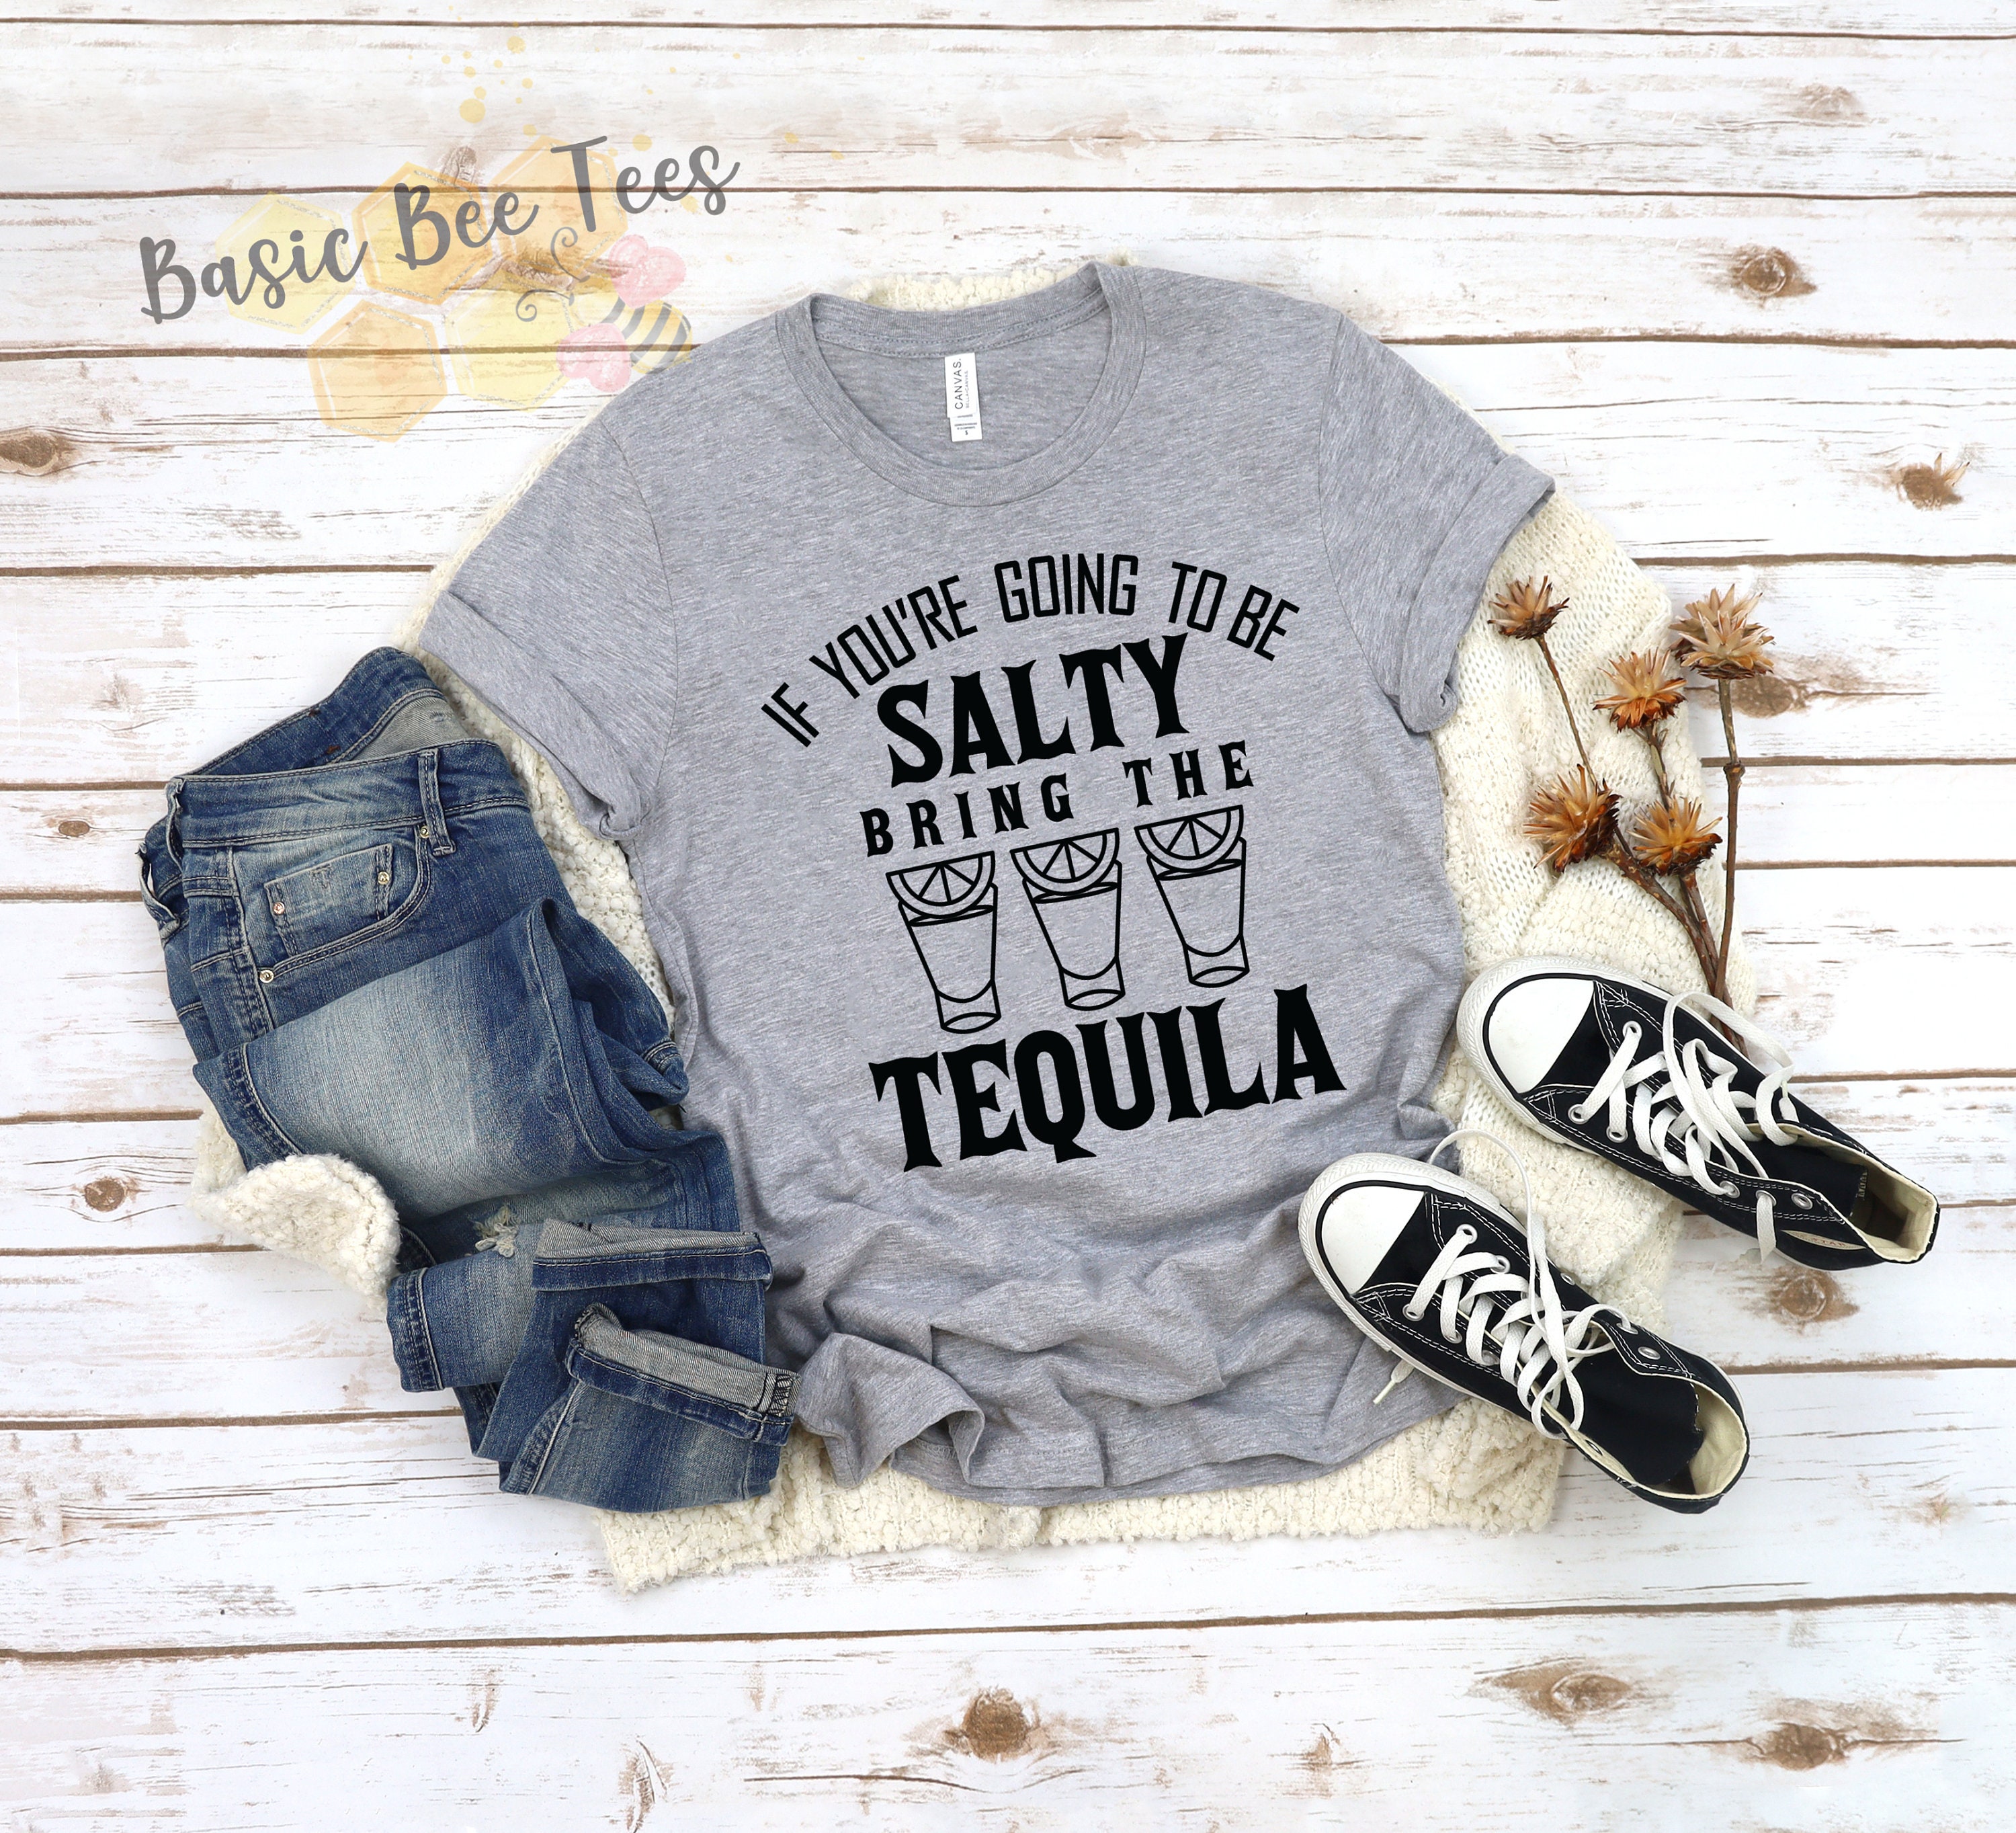 If You're Going to Be Salty Bring the Tequila Funny | Etsy